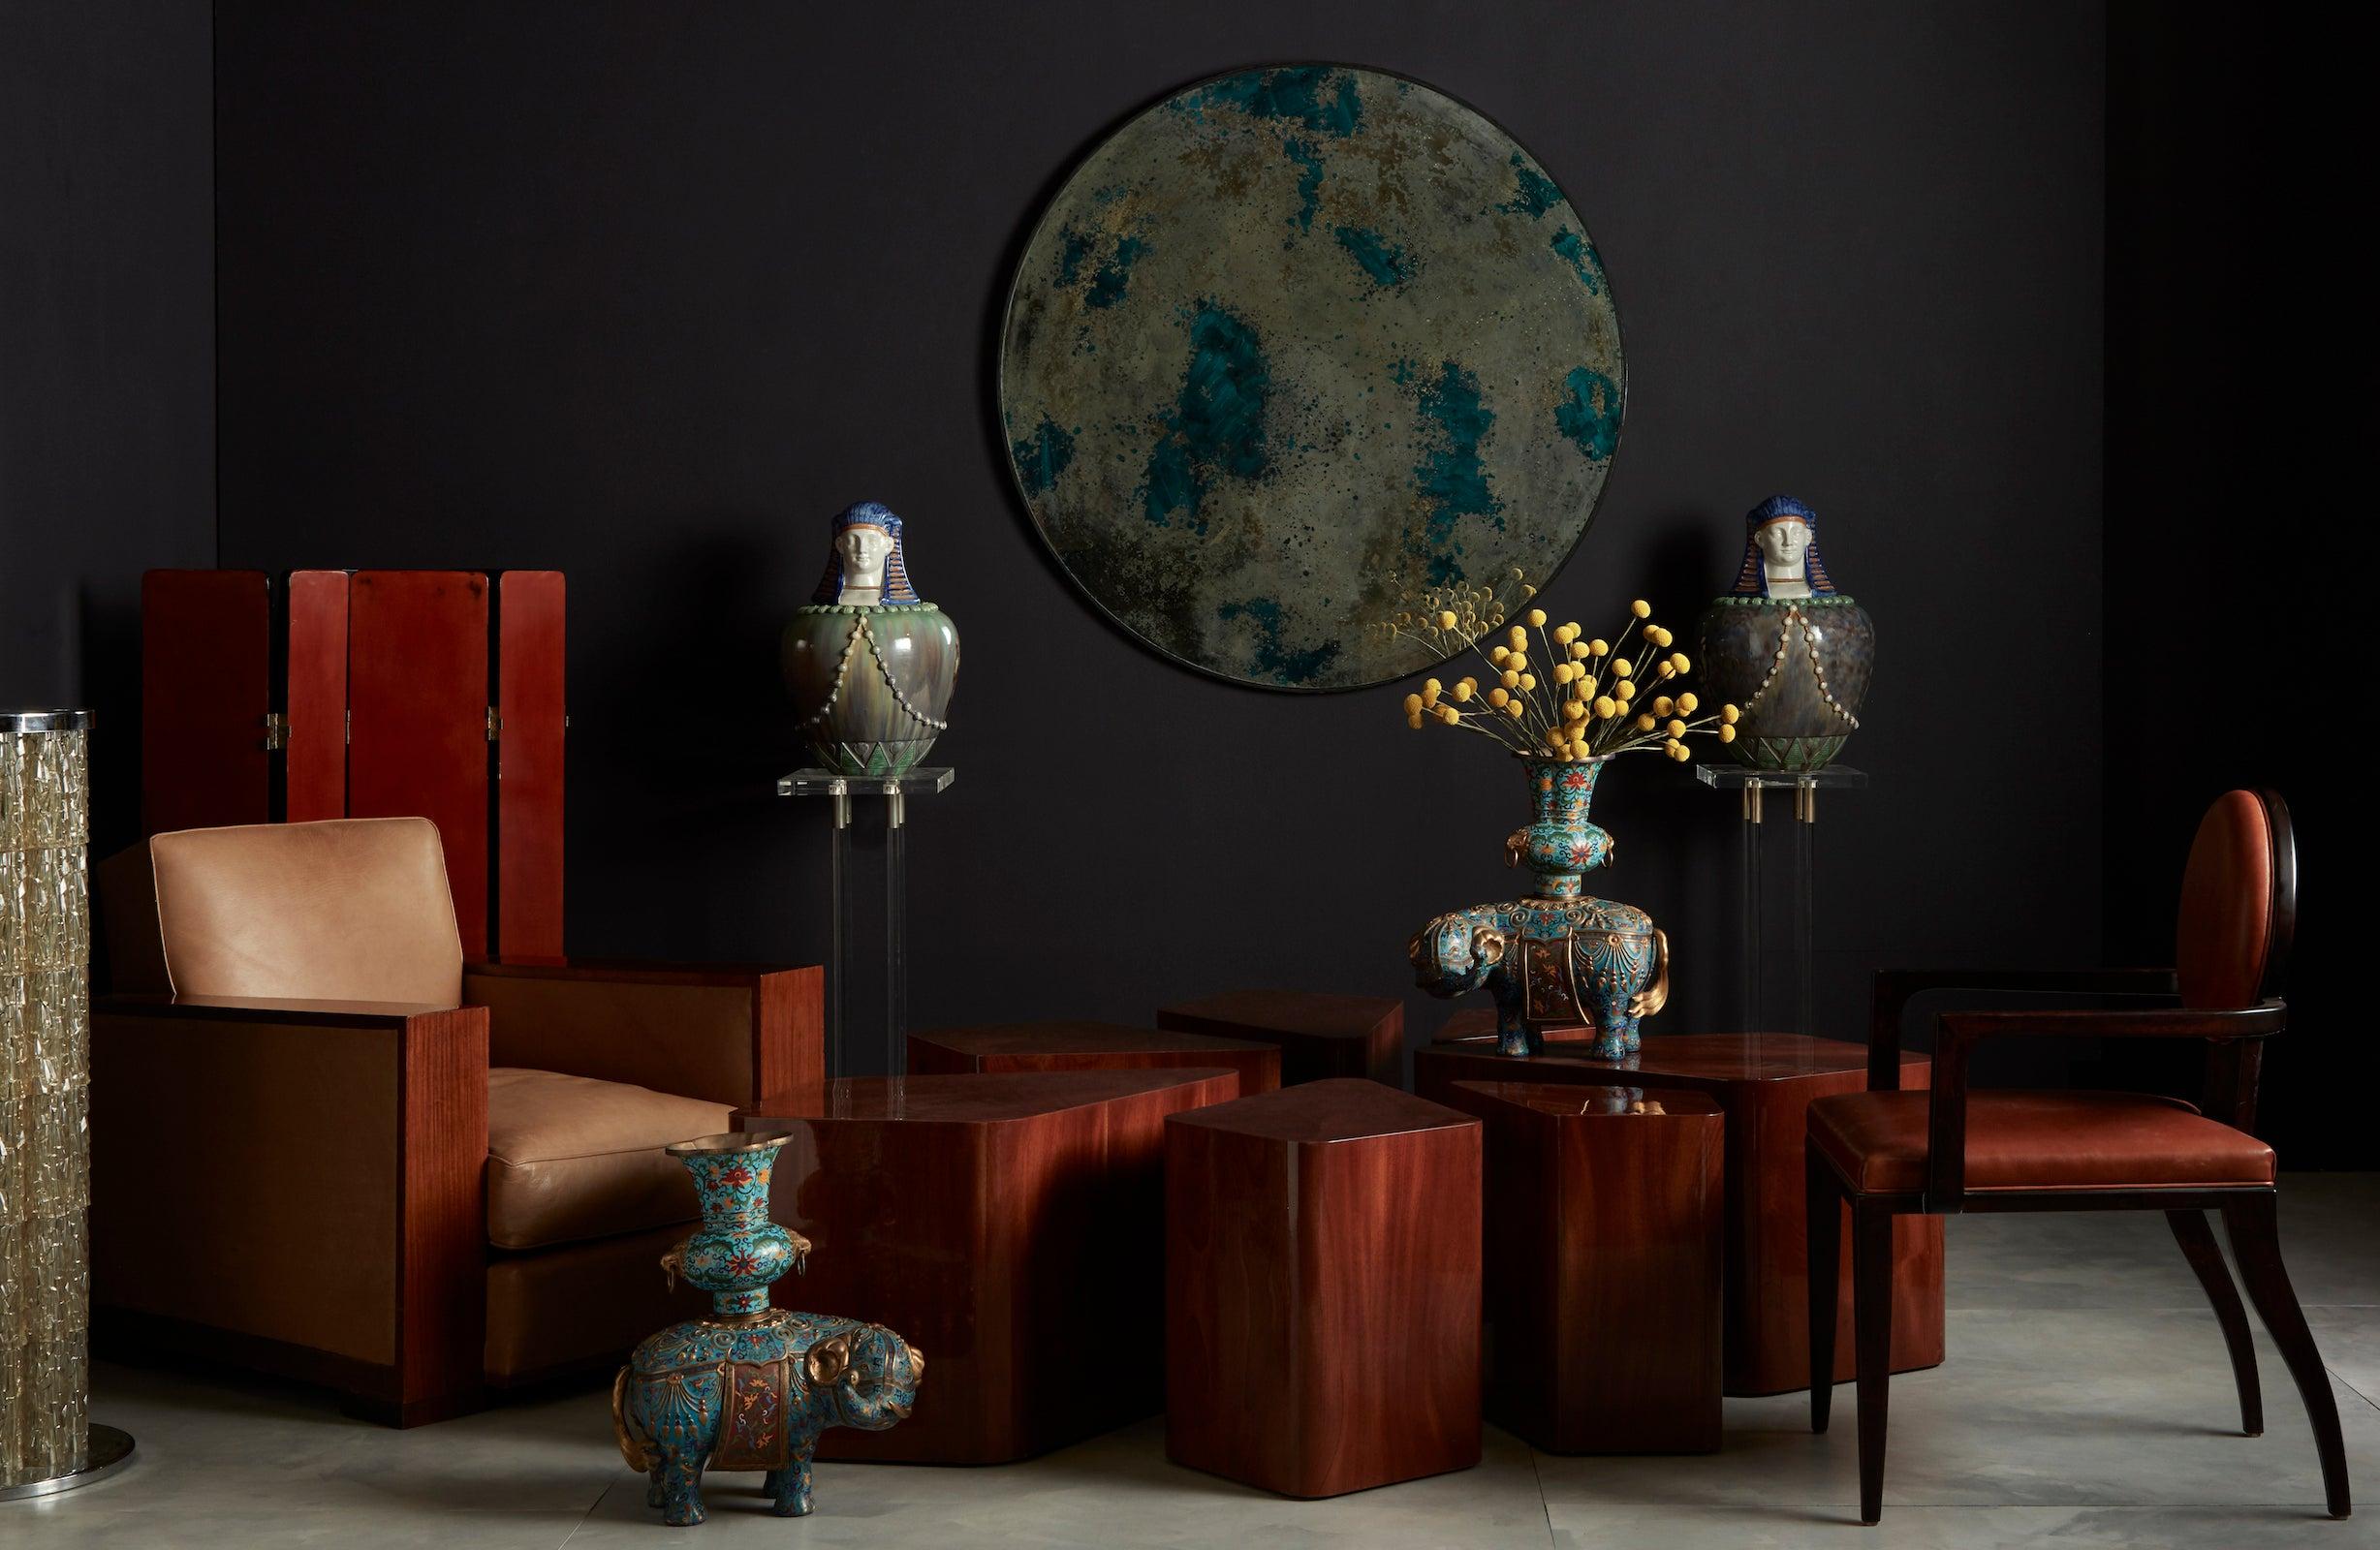 This set is composed of seven petal-shaped side tables of varying sizes made from lacquered maple. Designed by interior designer Juan Montoya, these lacquered wood tables can be arranged together to form a larger flower-shaped table or dispersed